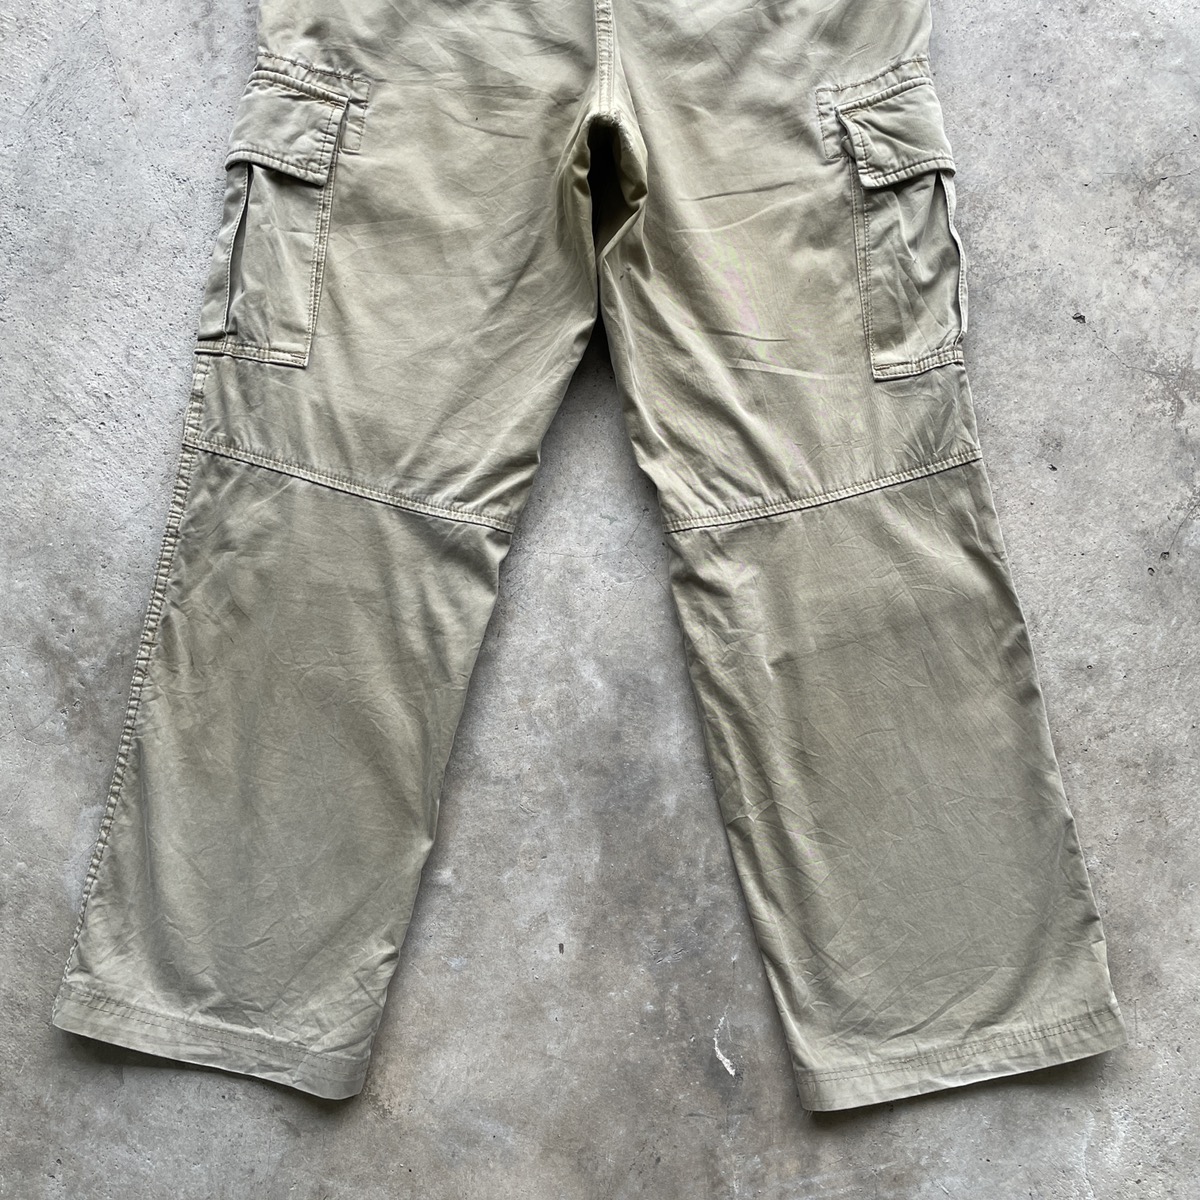 Vintage - Japanese Brand Faded Multipocket Tactical Cargo Pants W33x28 - 11